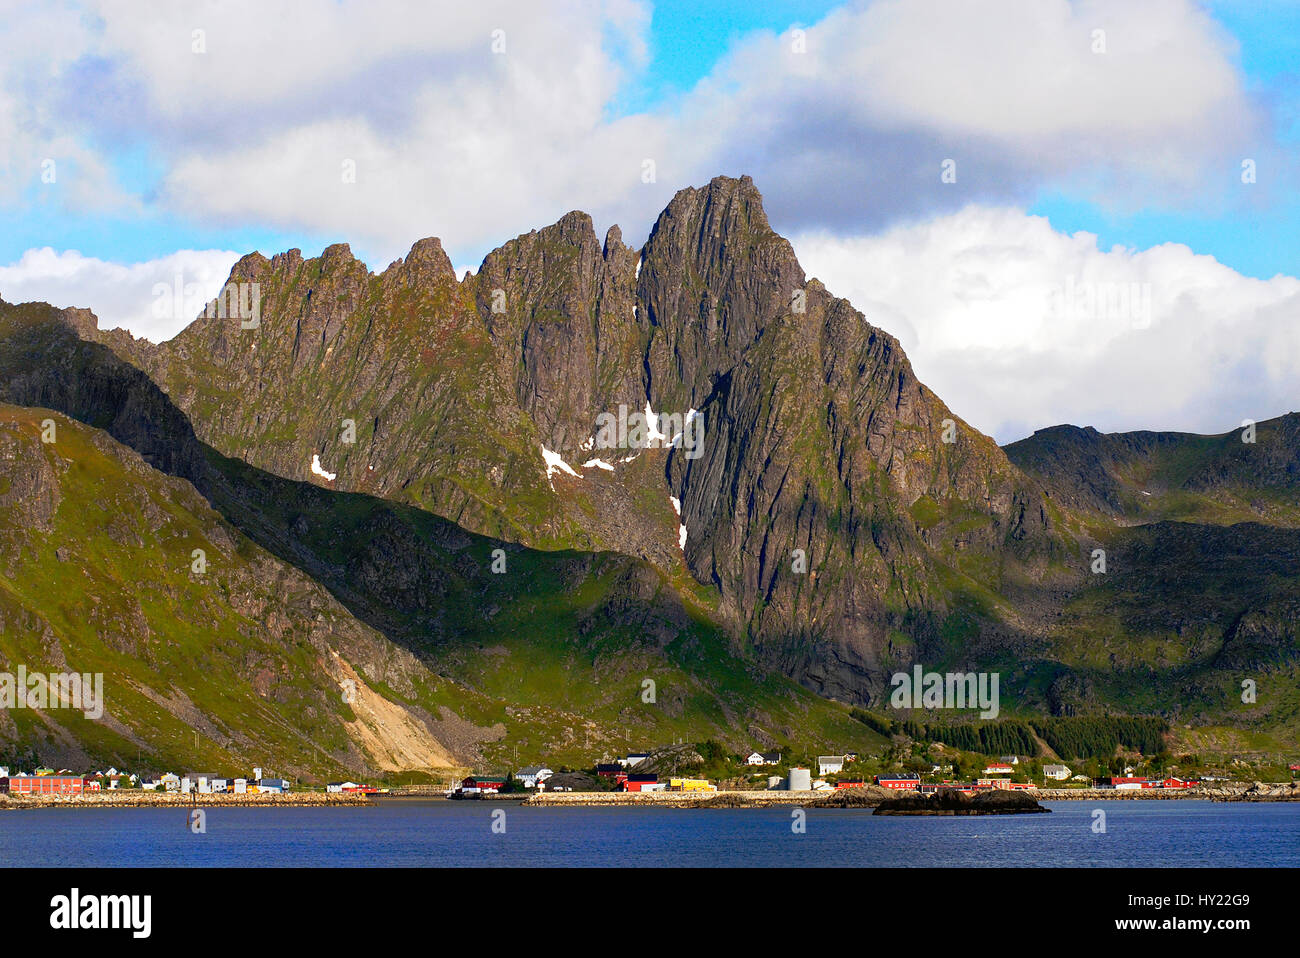 The image shows a spectacular MountainRange in at the Lofoten Islandof Vestvagoy that belong to Norway. Just below the mountain range at the coast is  Stock Photo